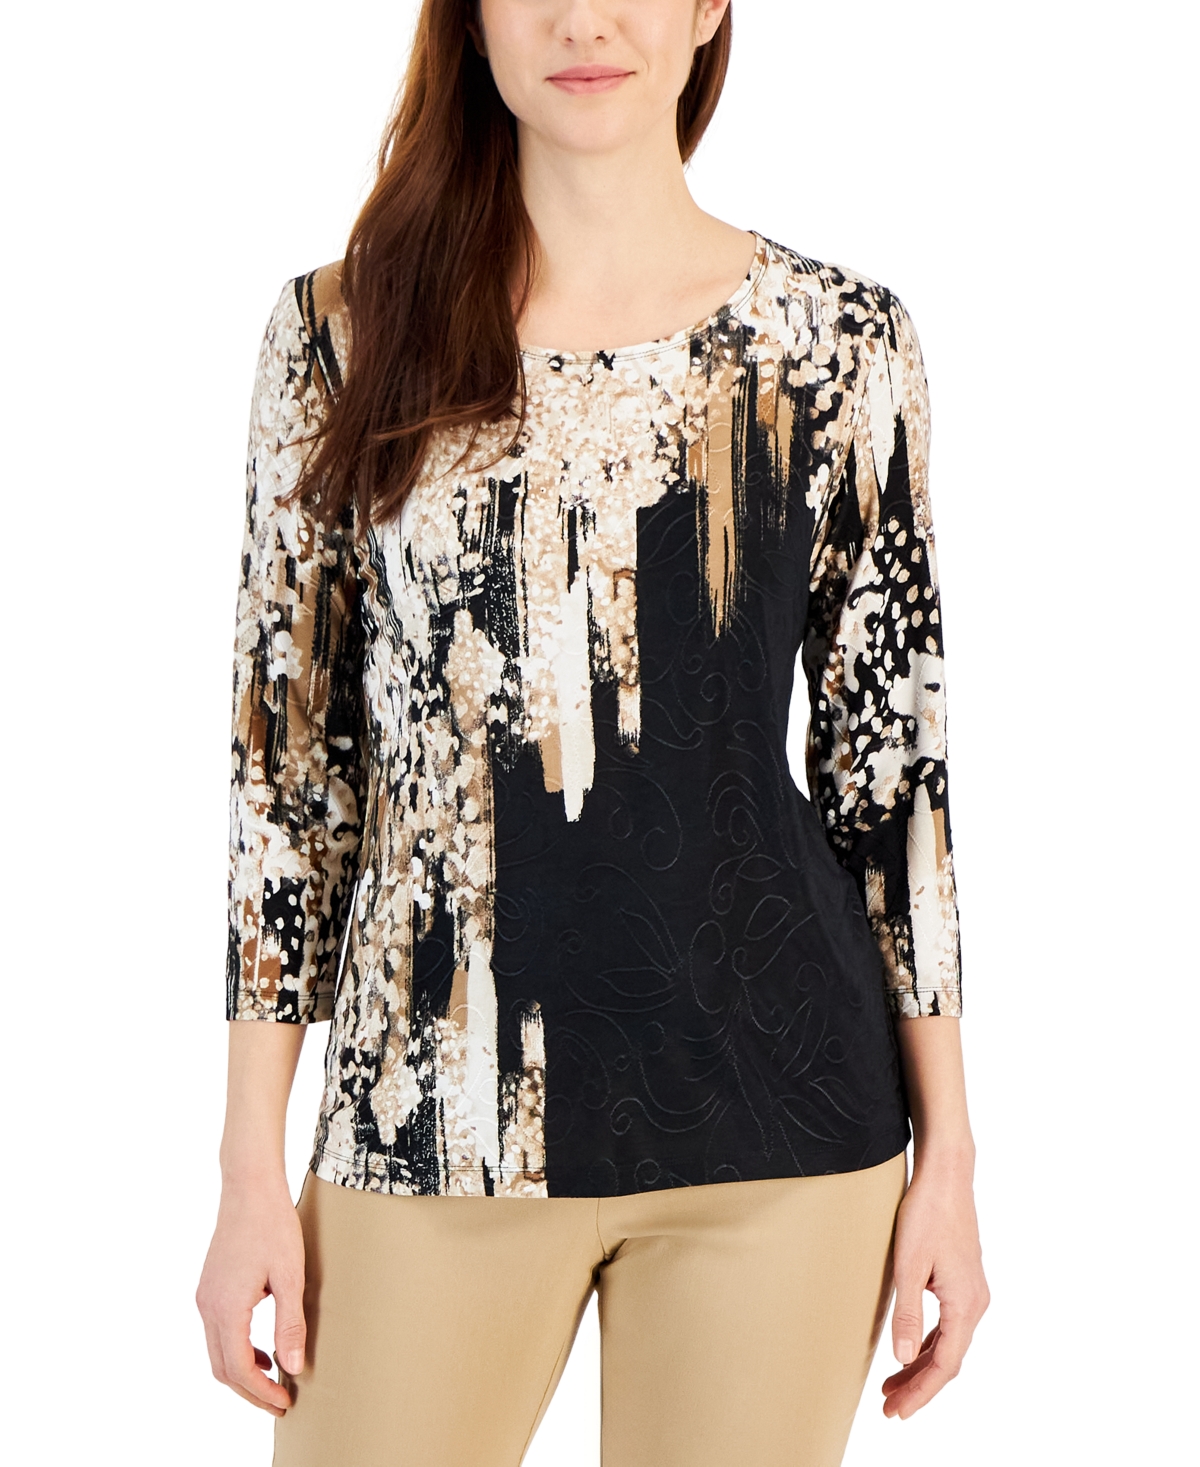 JM Collection Printed Layered-Look Top, Created for Macy's - ShopStyle